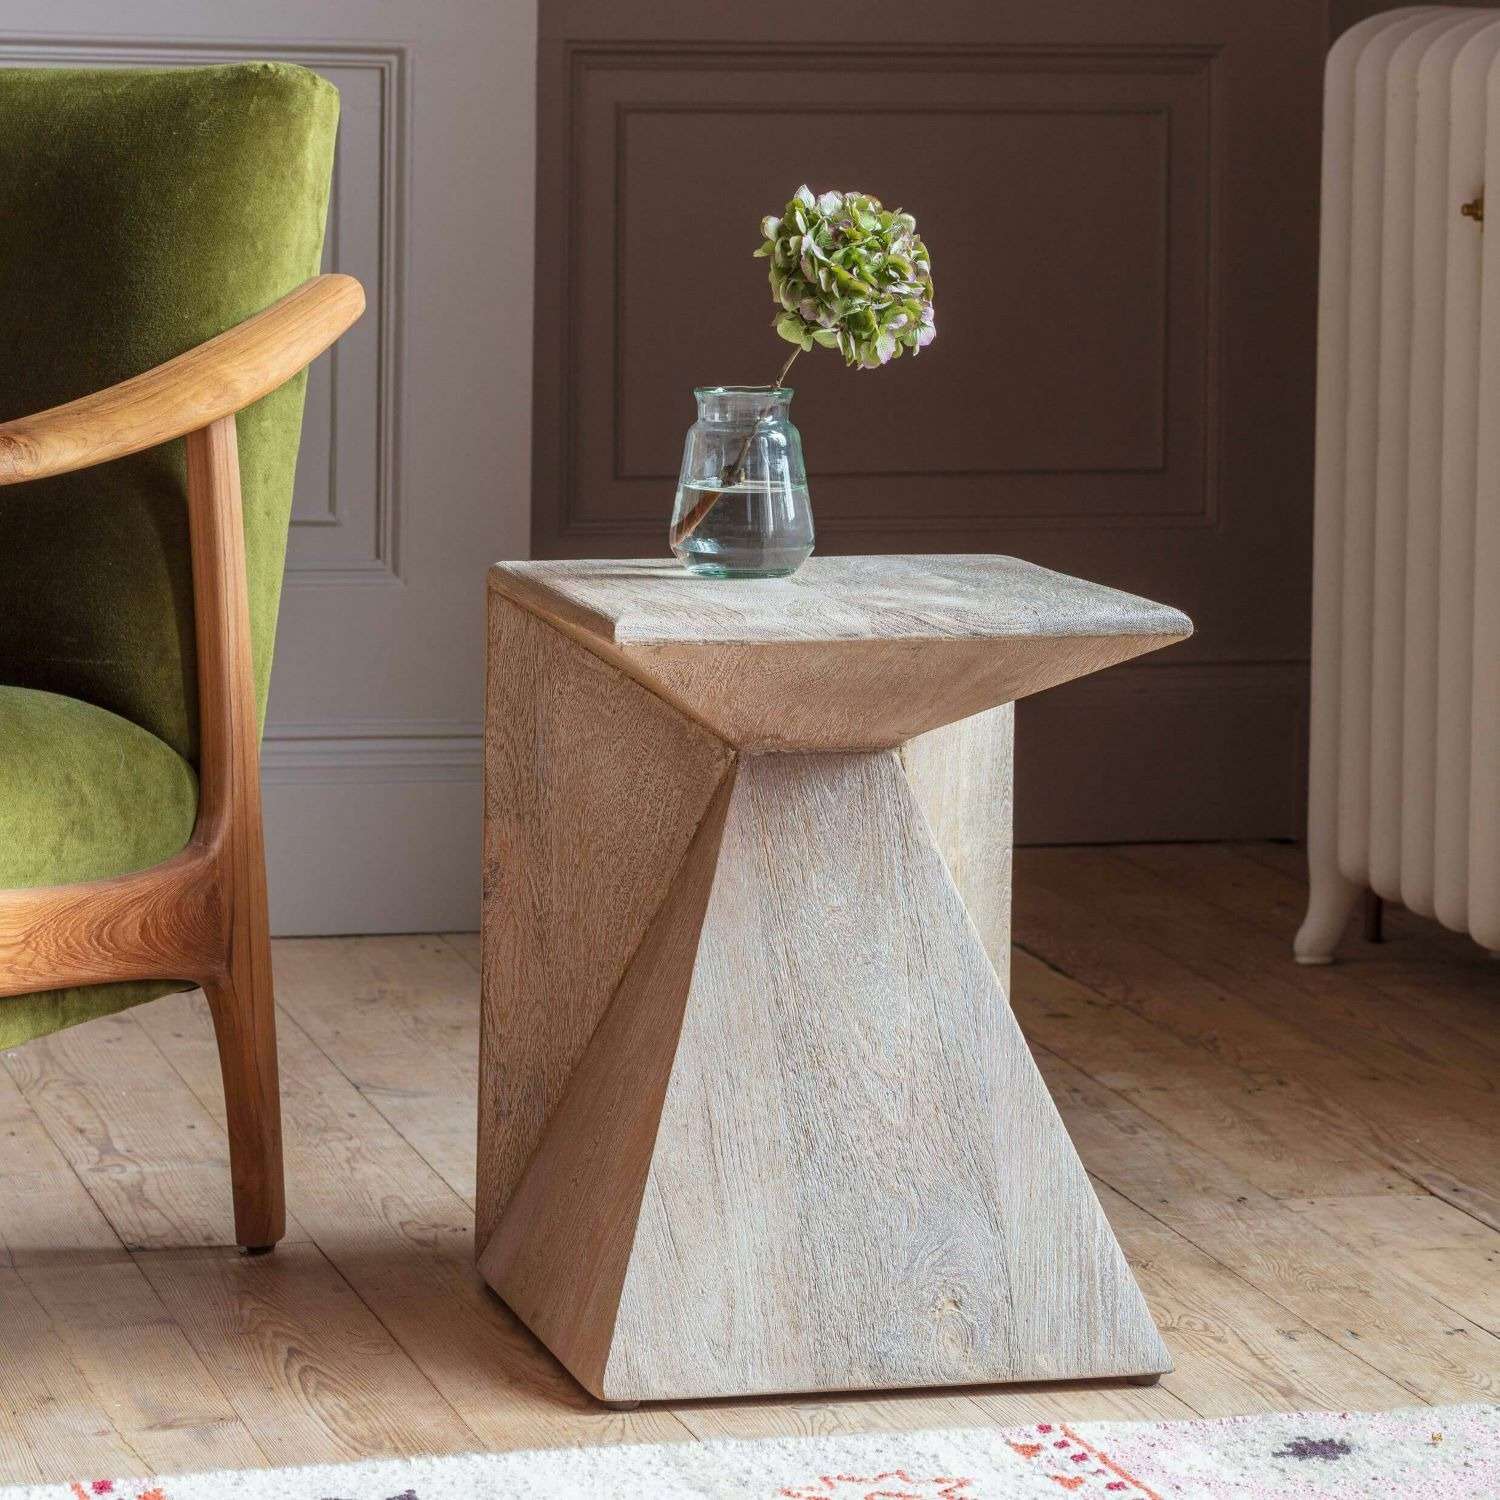 Graham and Green Alani Wooden Side Table - image 1